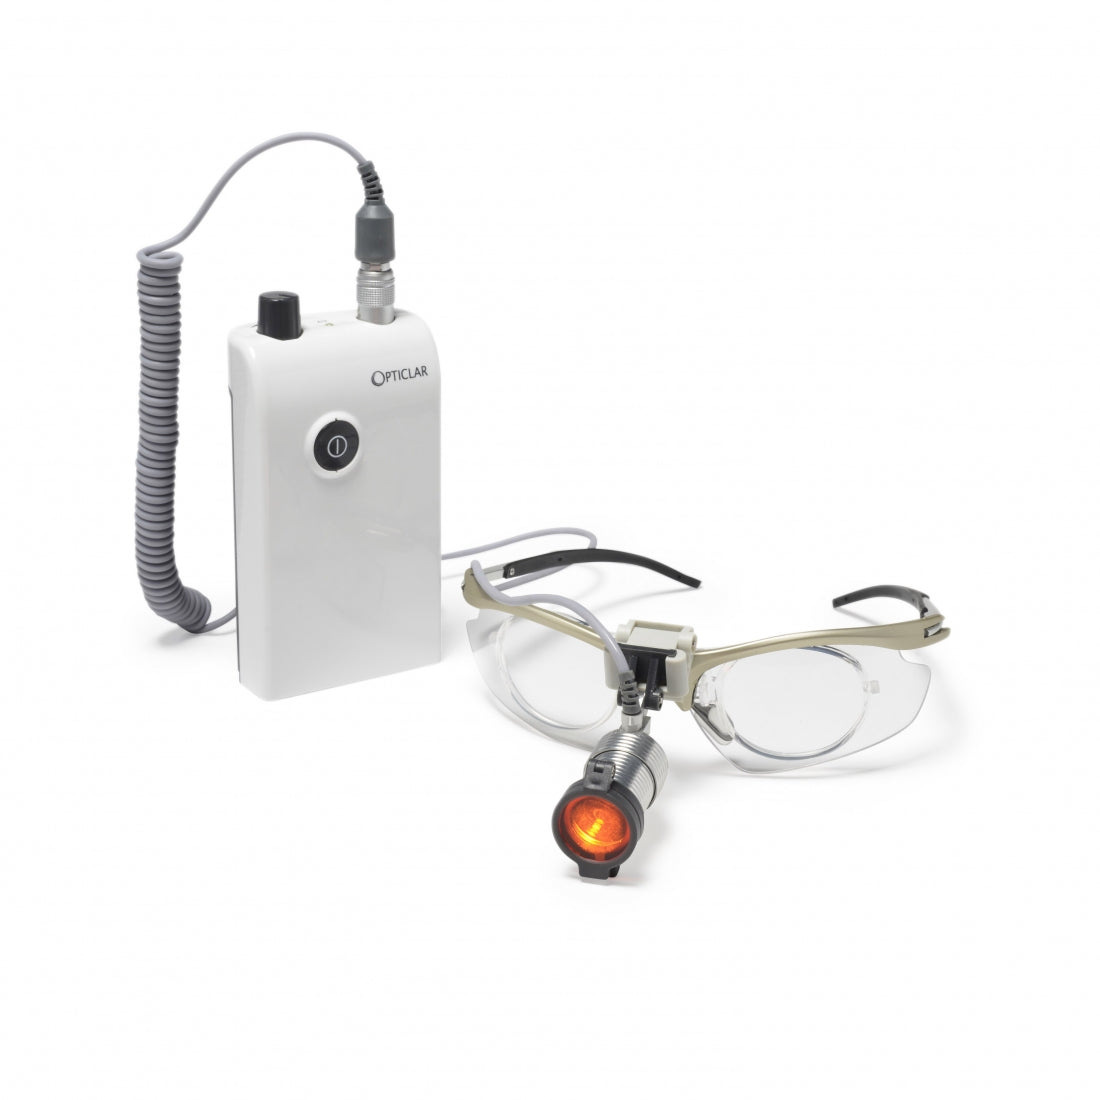 Opticlar - Spectacle Headlight with Dedicated Spectacle Fitting